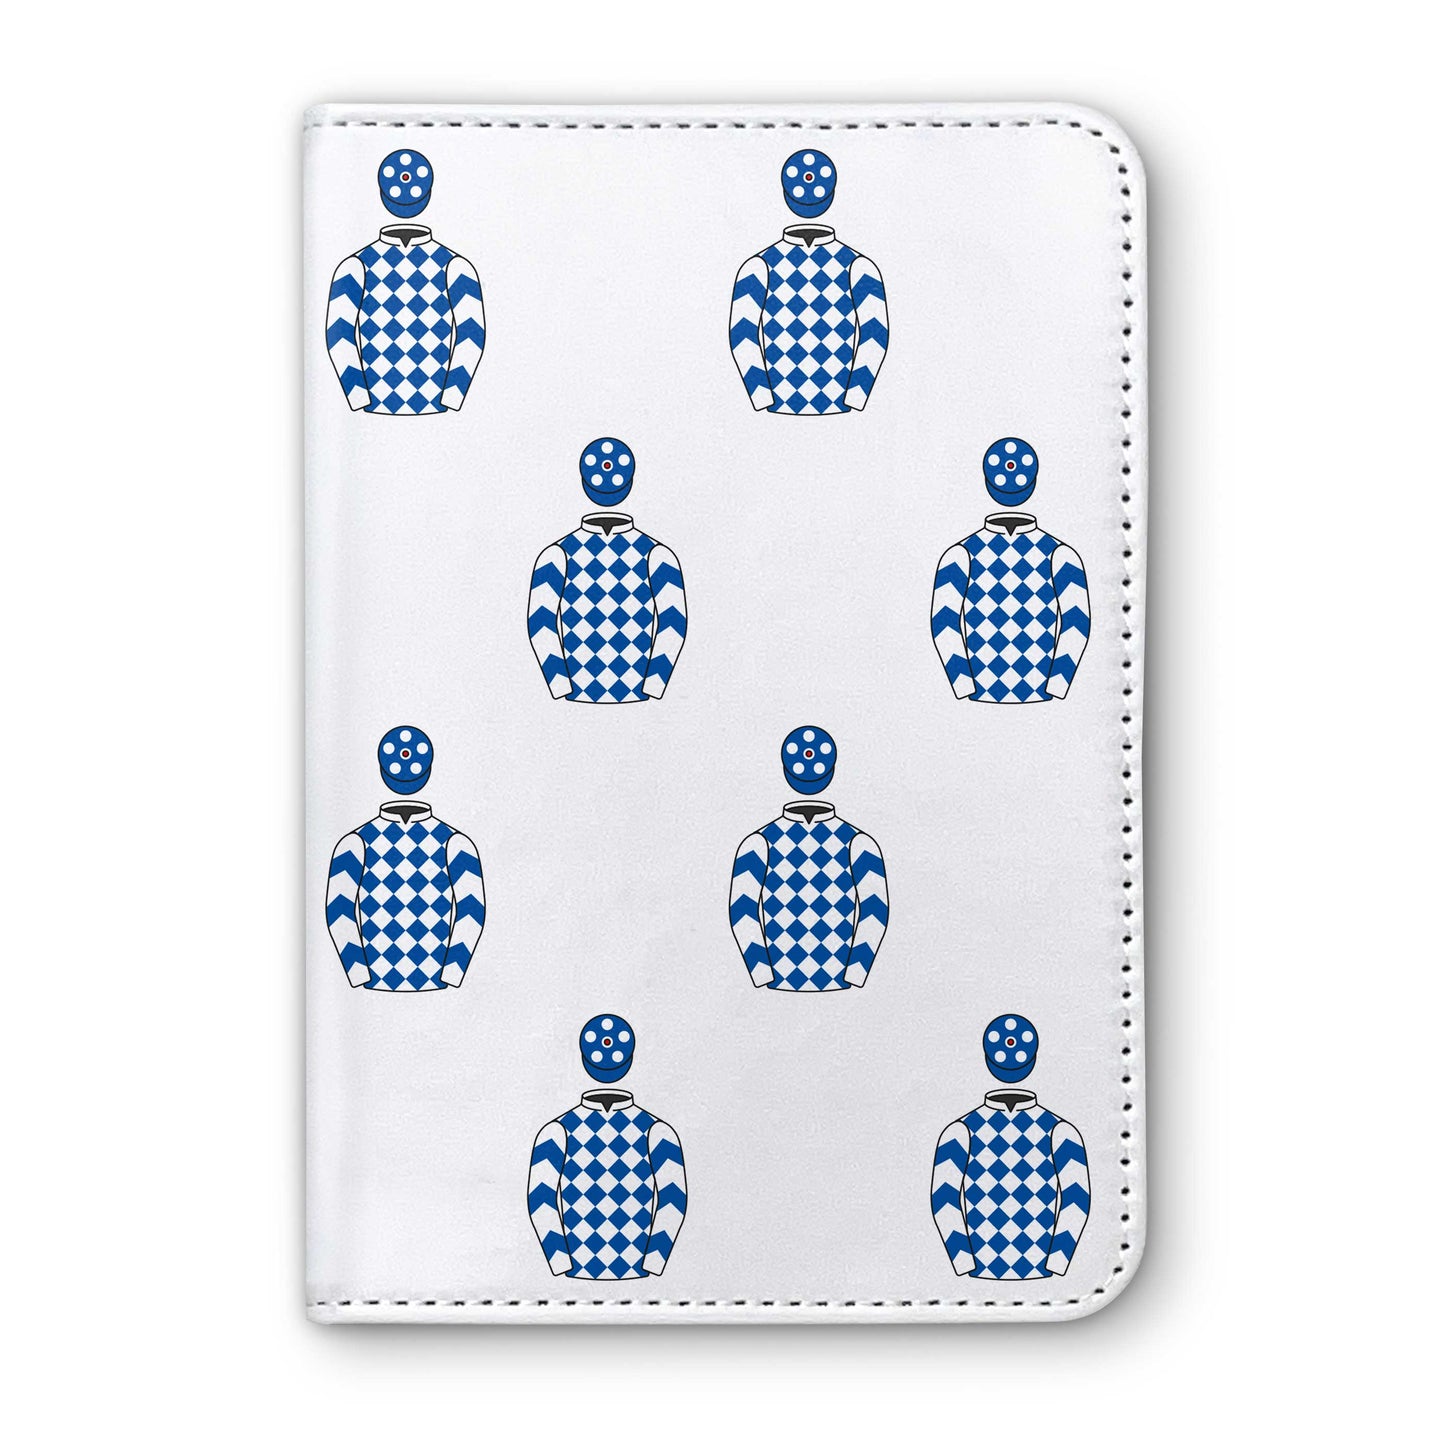 Yes He Does Syndicate Horse Racing Passport Holder - Hacked Up Horse Racing Gifts